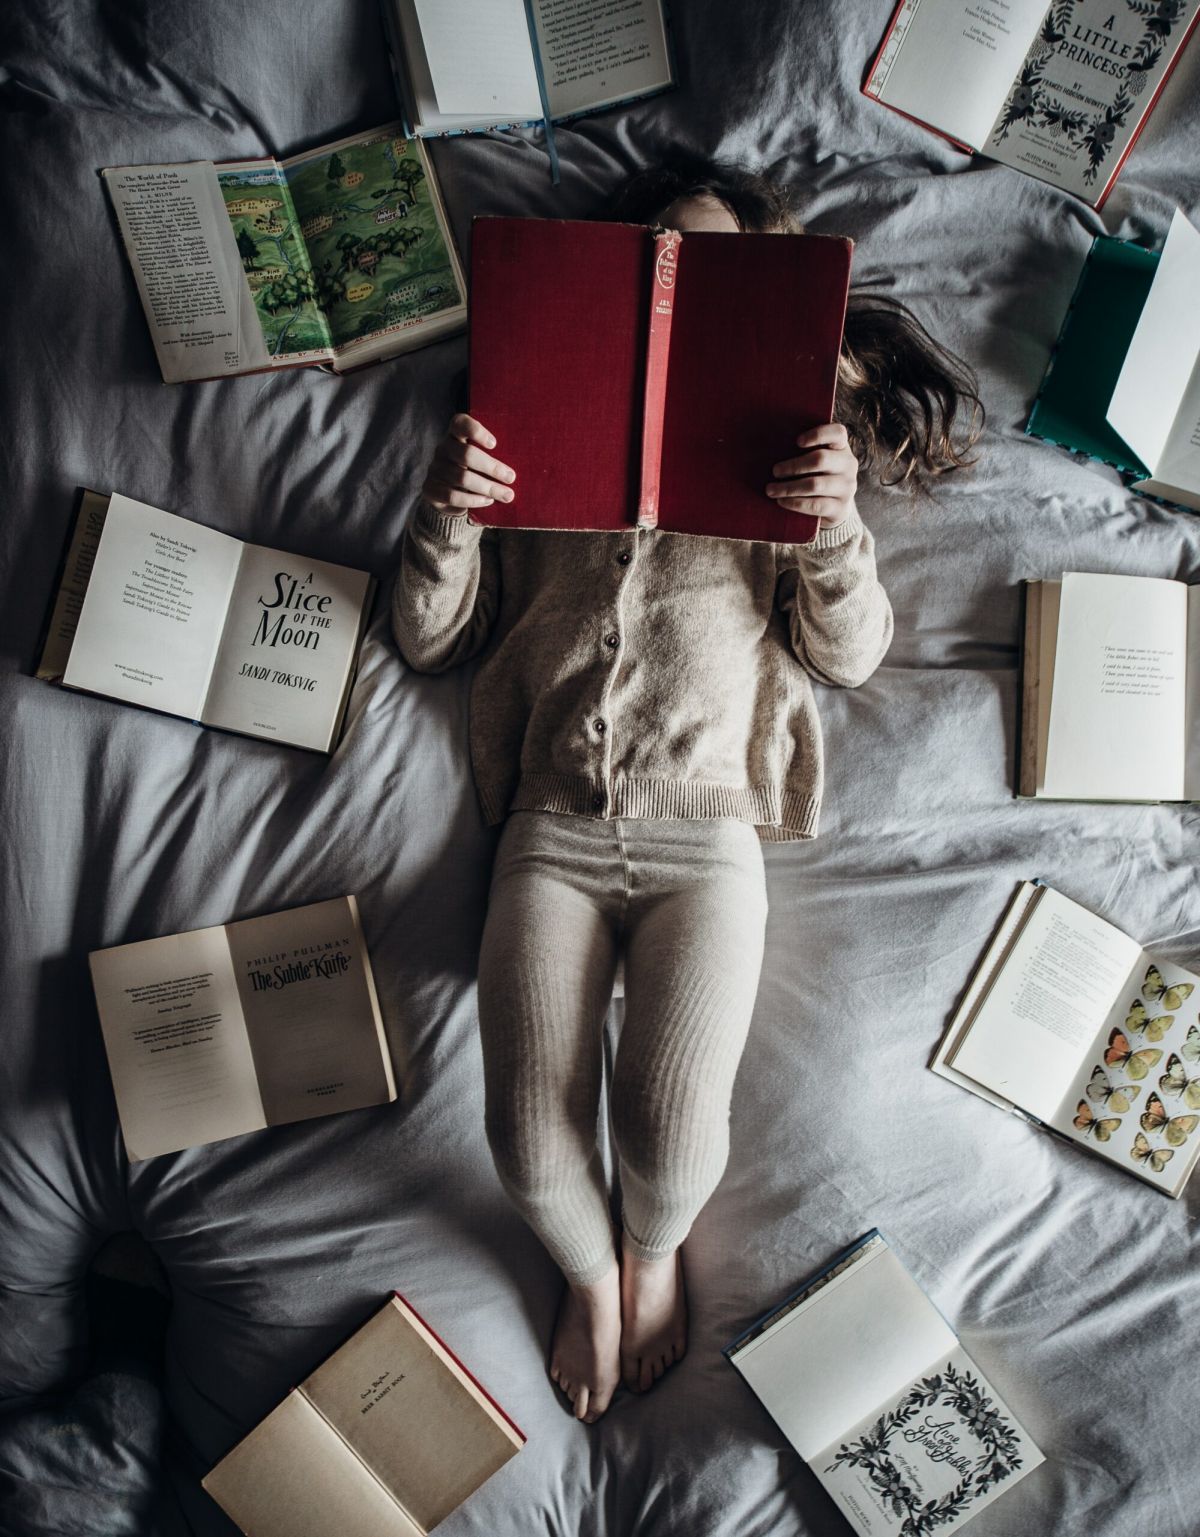 A cure for homesickness: Books to annotate and gift to loved ones